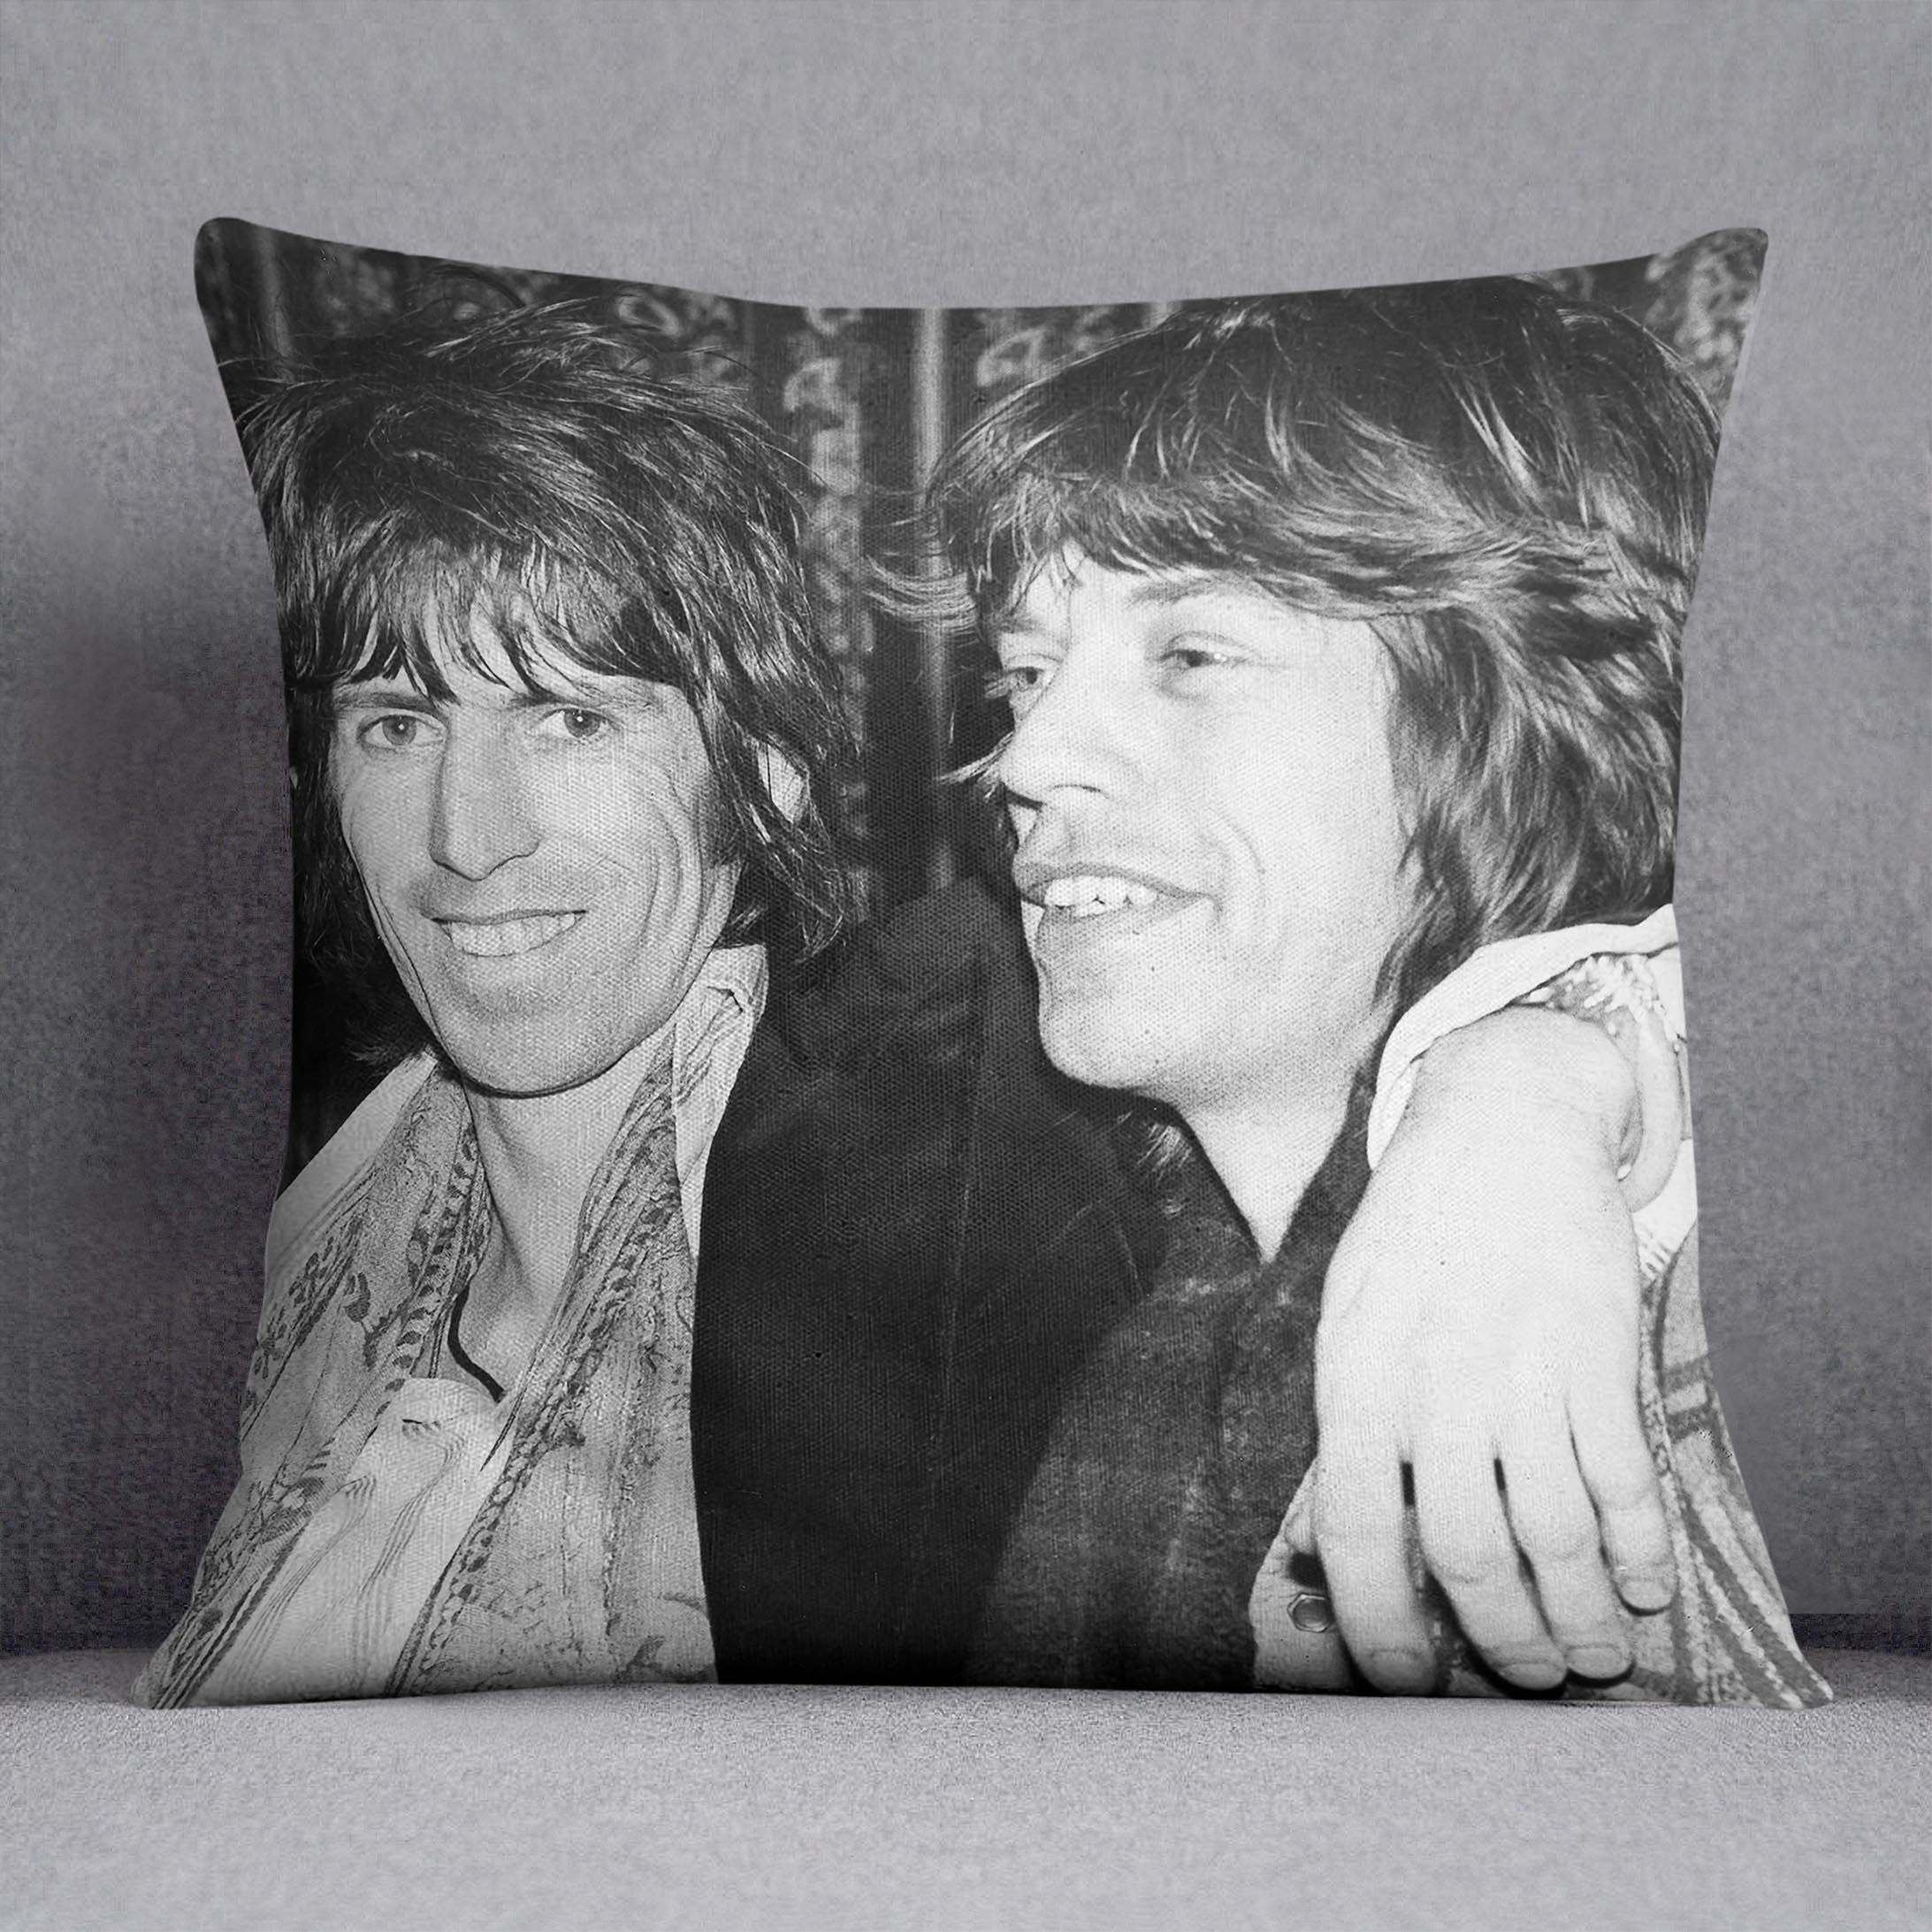 Keith Richards and Mick Jagger celebrate Cushion